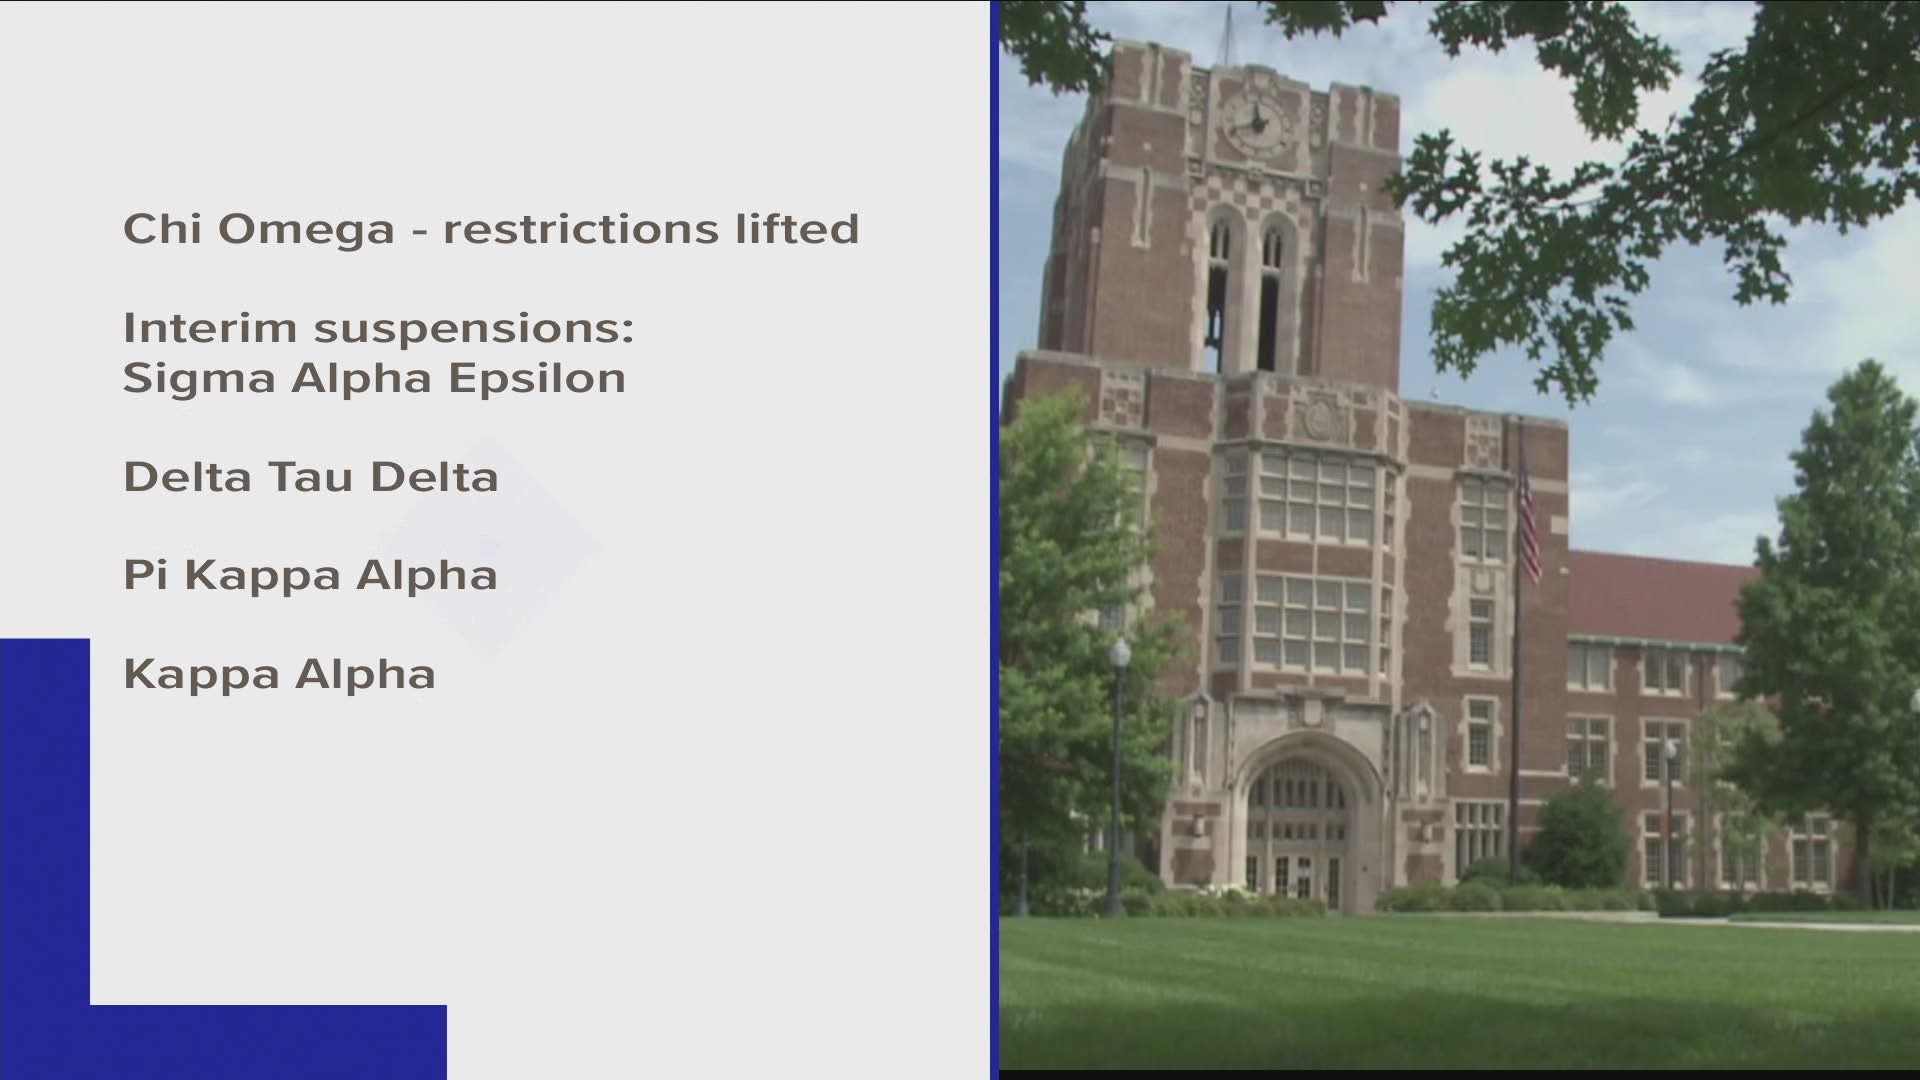 Officials said that the interim restrictions on Chi Omega have been lifted.